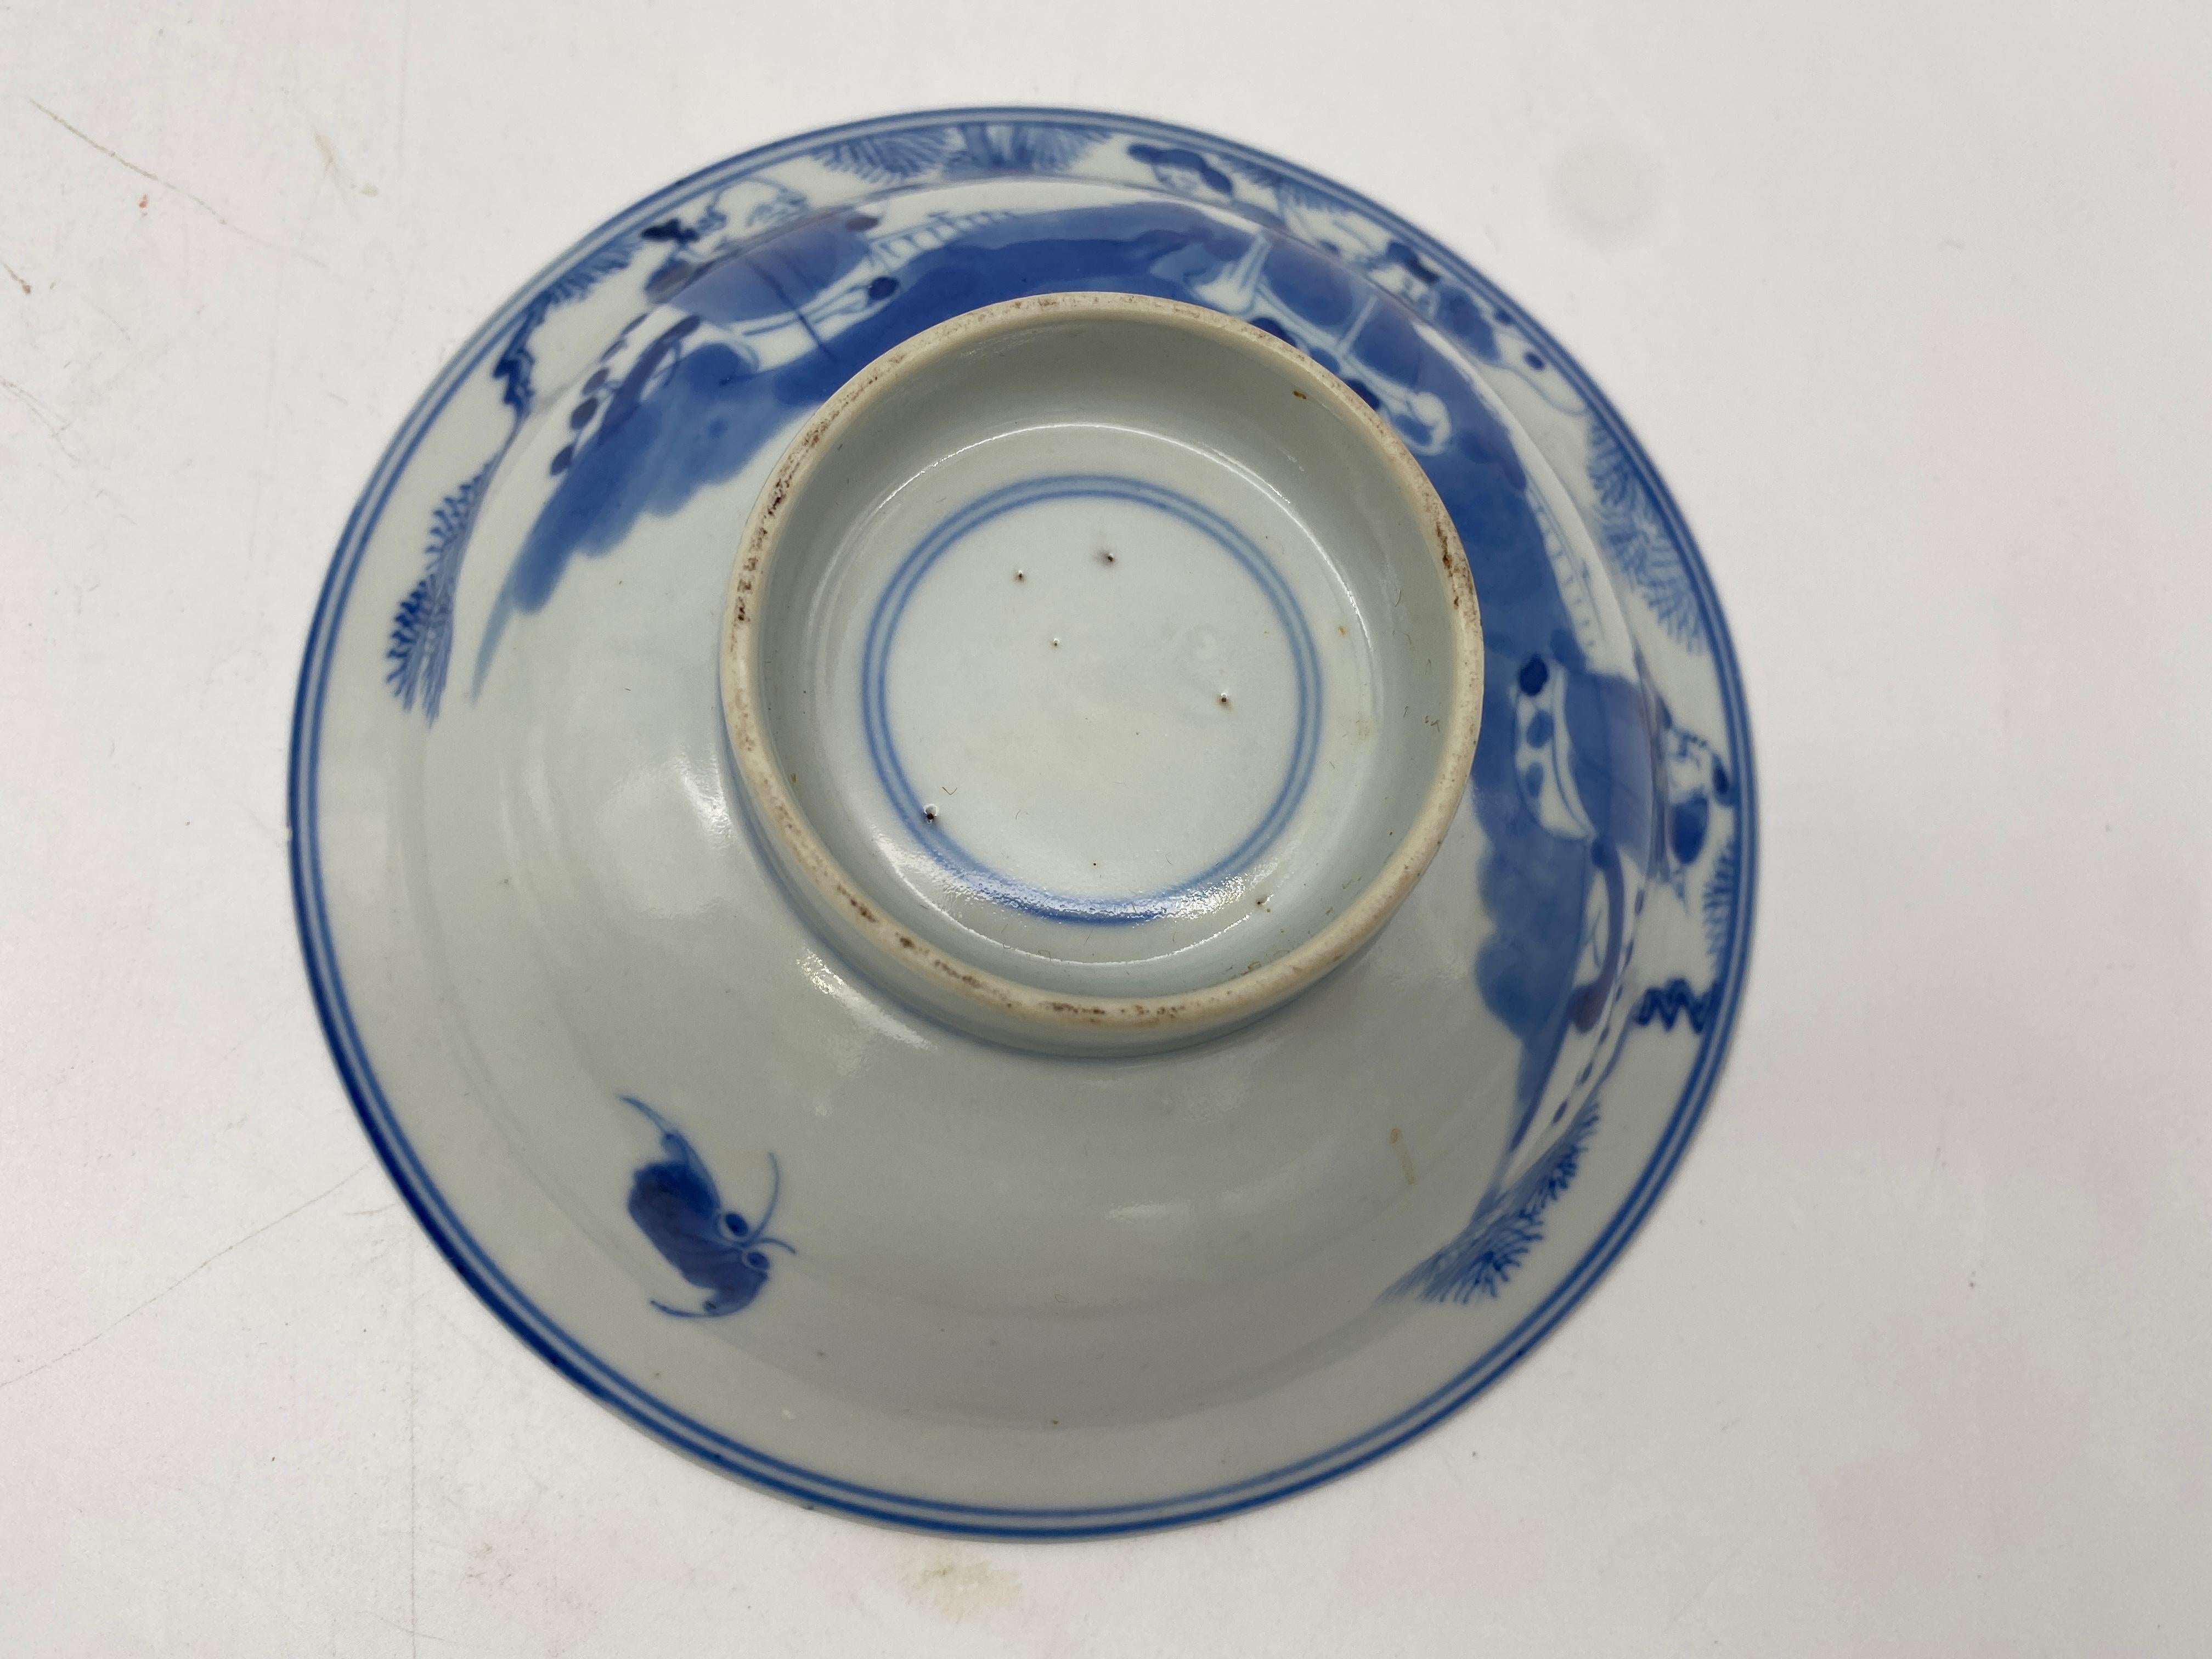 a pair of antique Chinese blue and white porcelain bowls with very beautiful hand paint. There are double blue circles at the bottom of the bowls, excellent condition, measures: 5.75” x 1.75 '' see carefully more pictures.